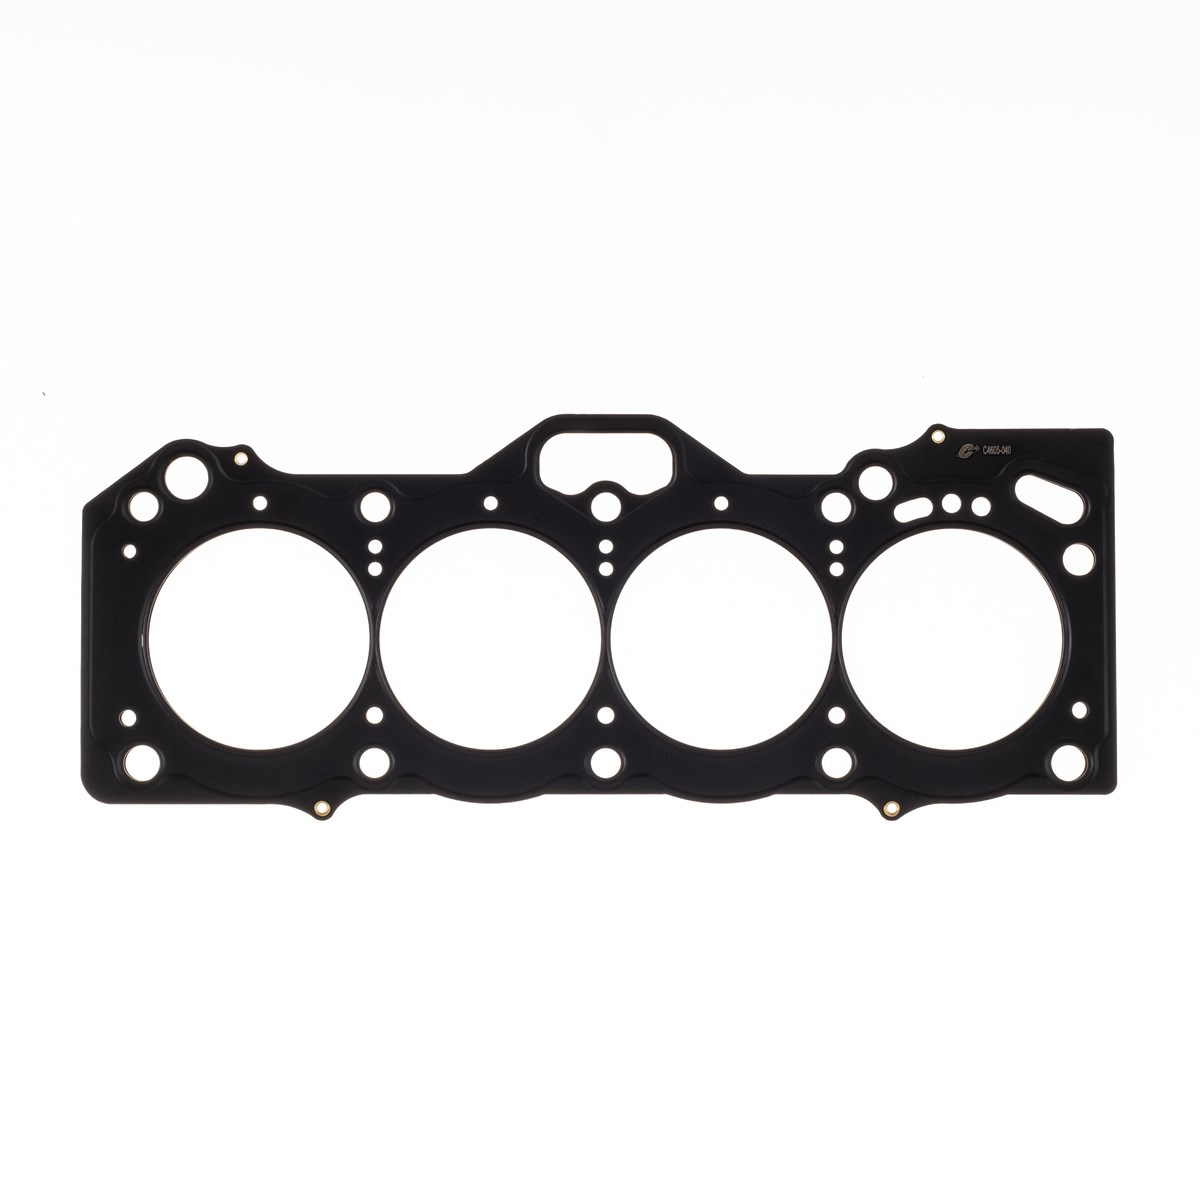 Cylinder Head Gasket Toyota 4A-GE .120" MLS , 83mm Bore, 20-Valve Cometic C4605-120